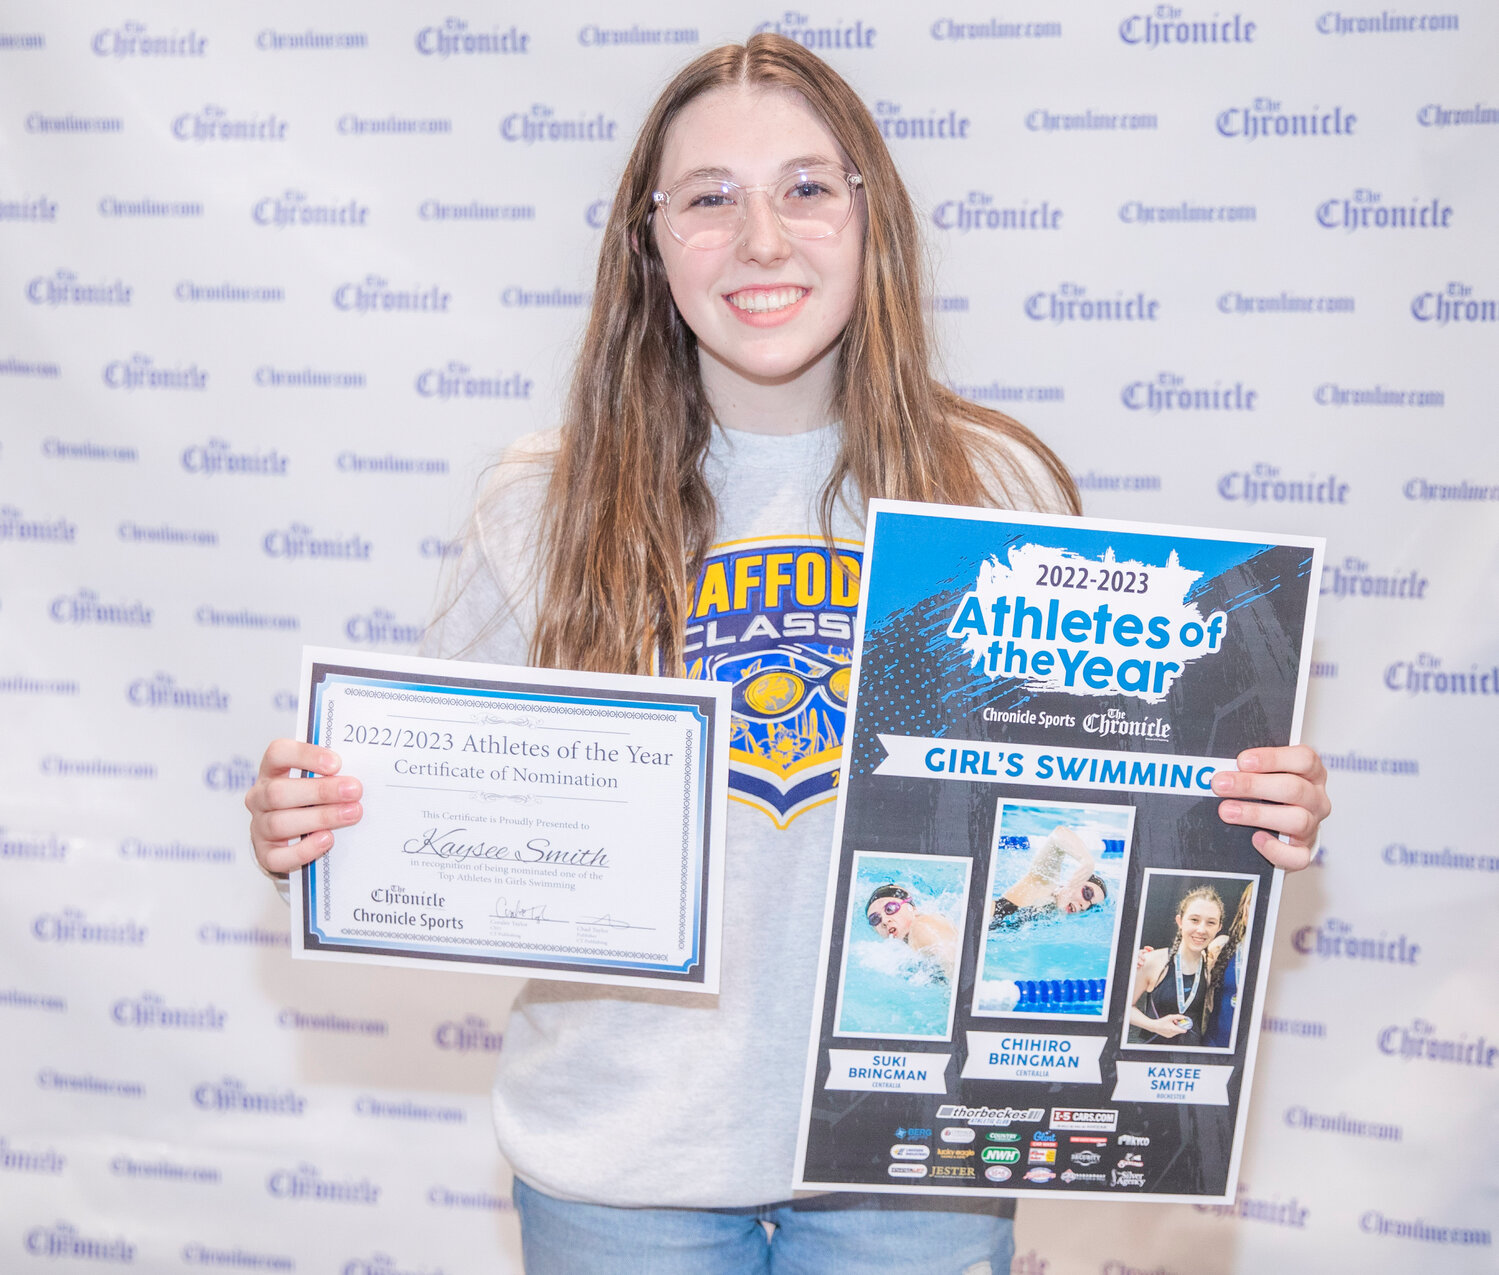 Rochester swimmer Kaysee Smith smiles for a photo Tuesday evening during the “Athletes of the Year” banquet at the Jester Auto Museum. One of the area’s top swimmers, Smith qualified for the State meet in two events with a strong showing at districts.